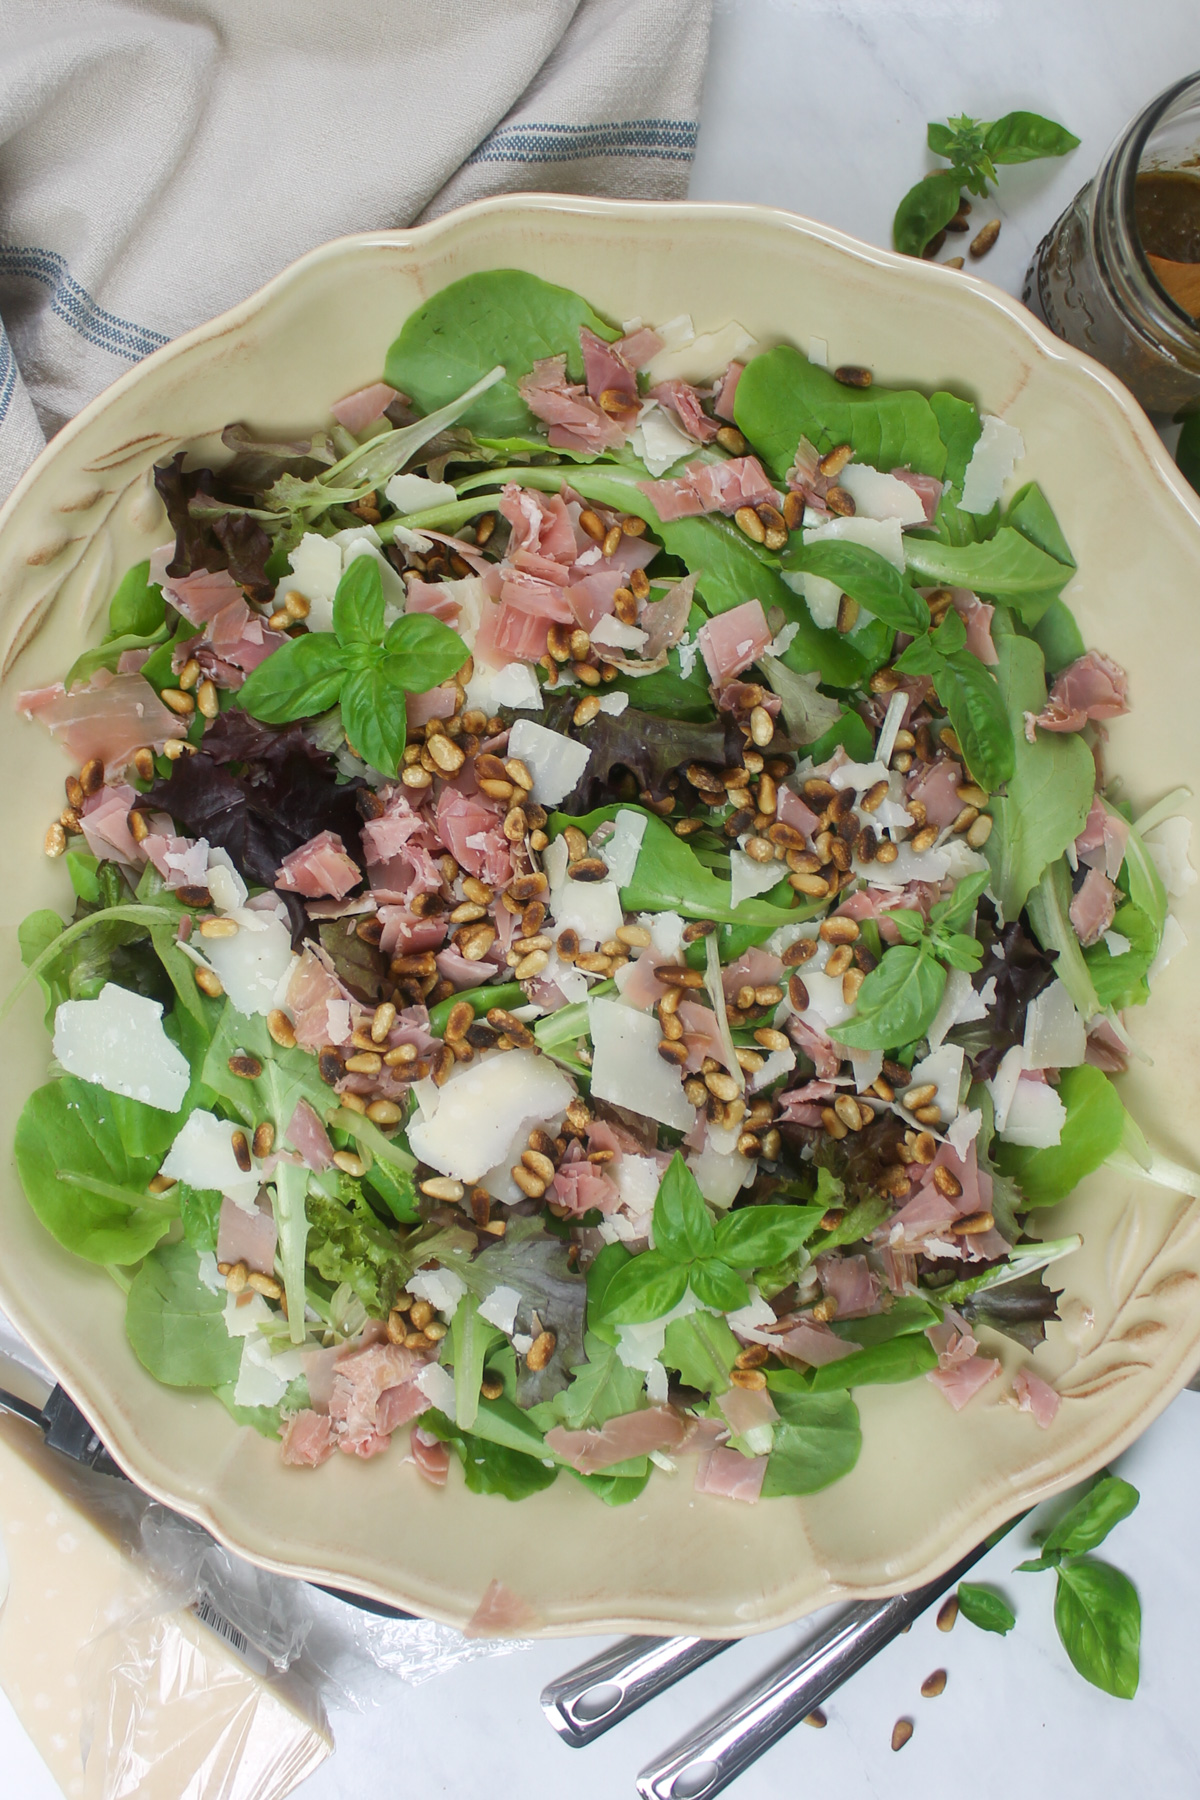 Prosciutto Parmesan Pine Nut Salad with Basic Balsamic Dressing.